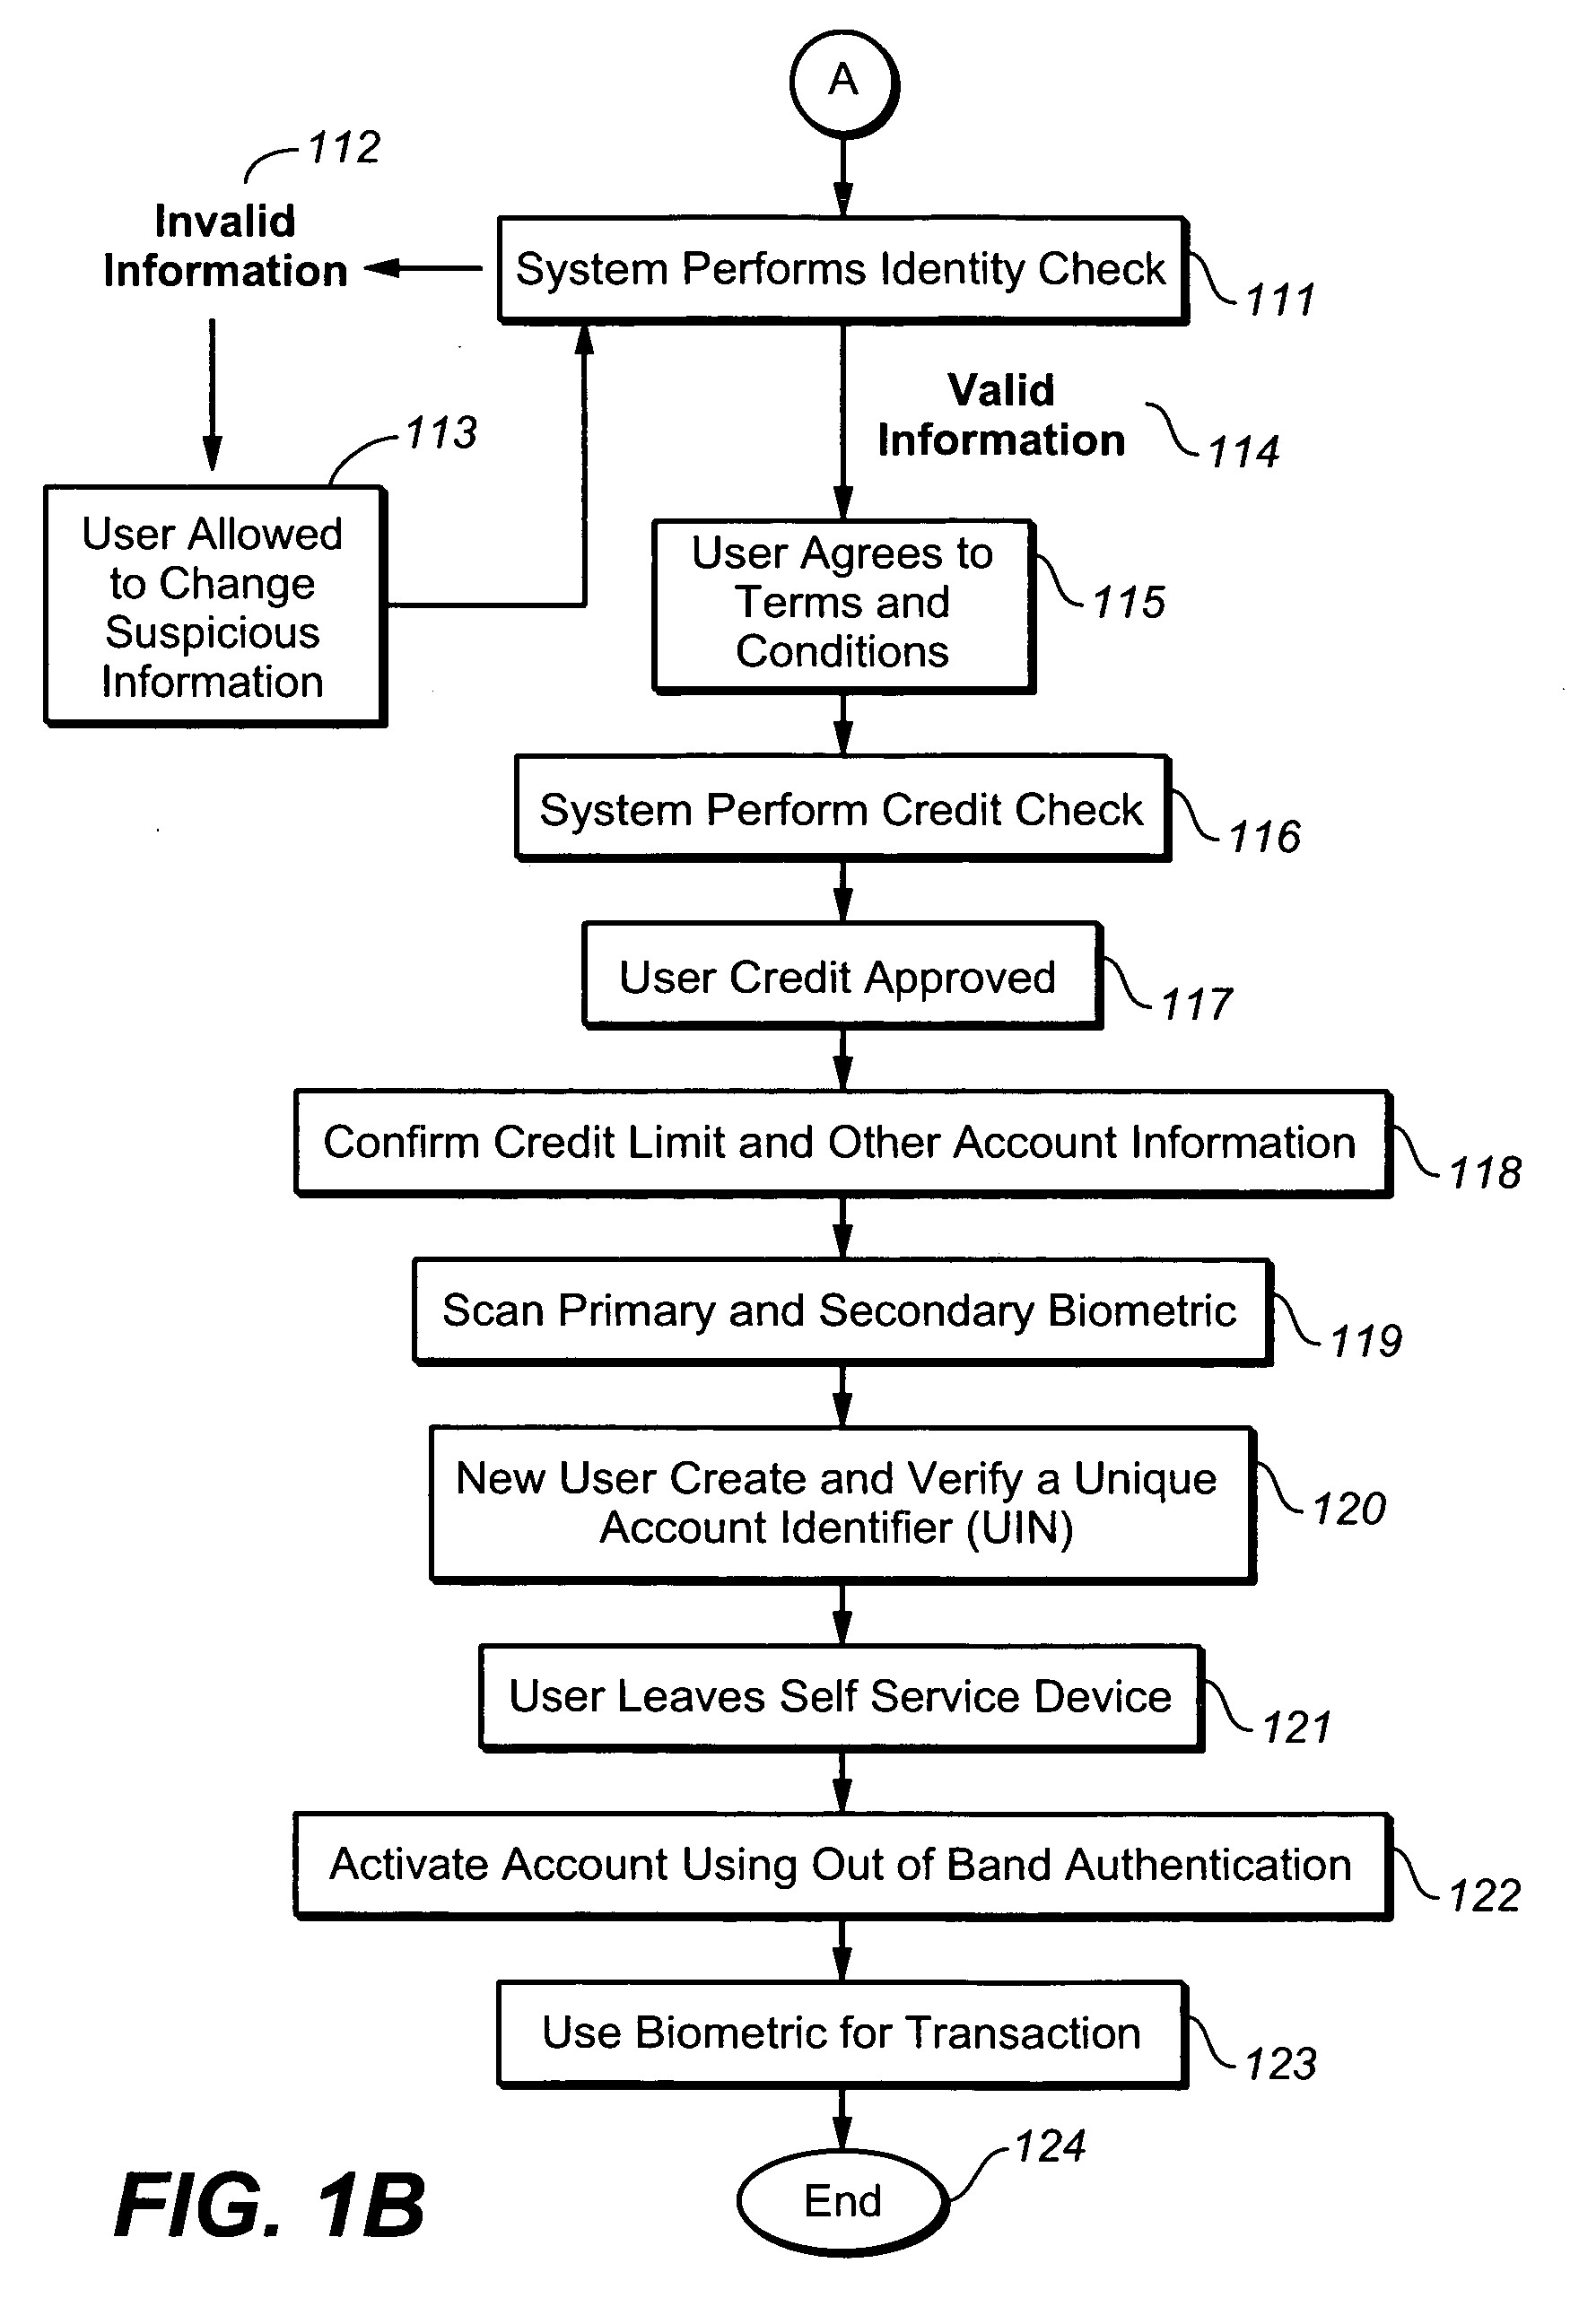 Methods and systems for performing tokenless financial transactions over a transaction network using biometric data